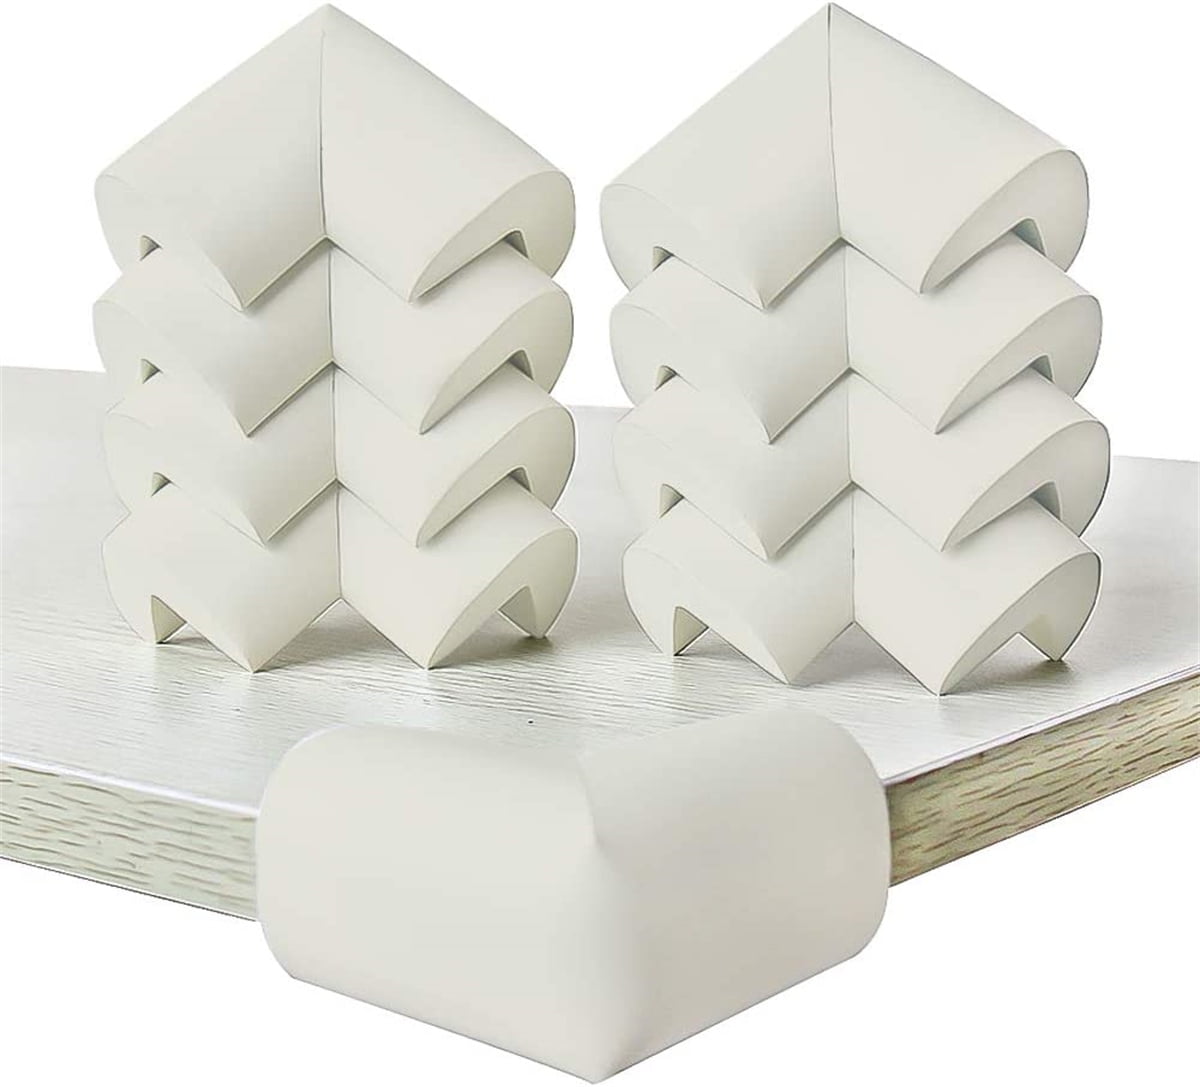 Soft Corner Guards (12-Pack) by Skyla Homes - Squishy Protectors